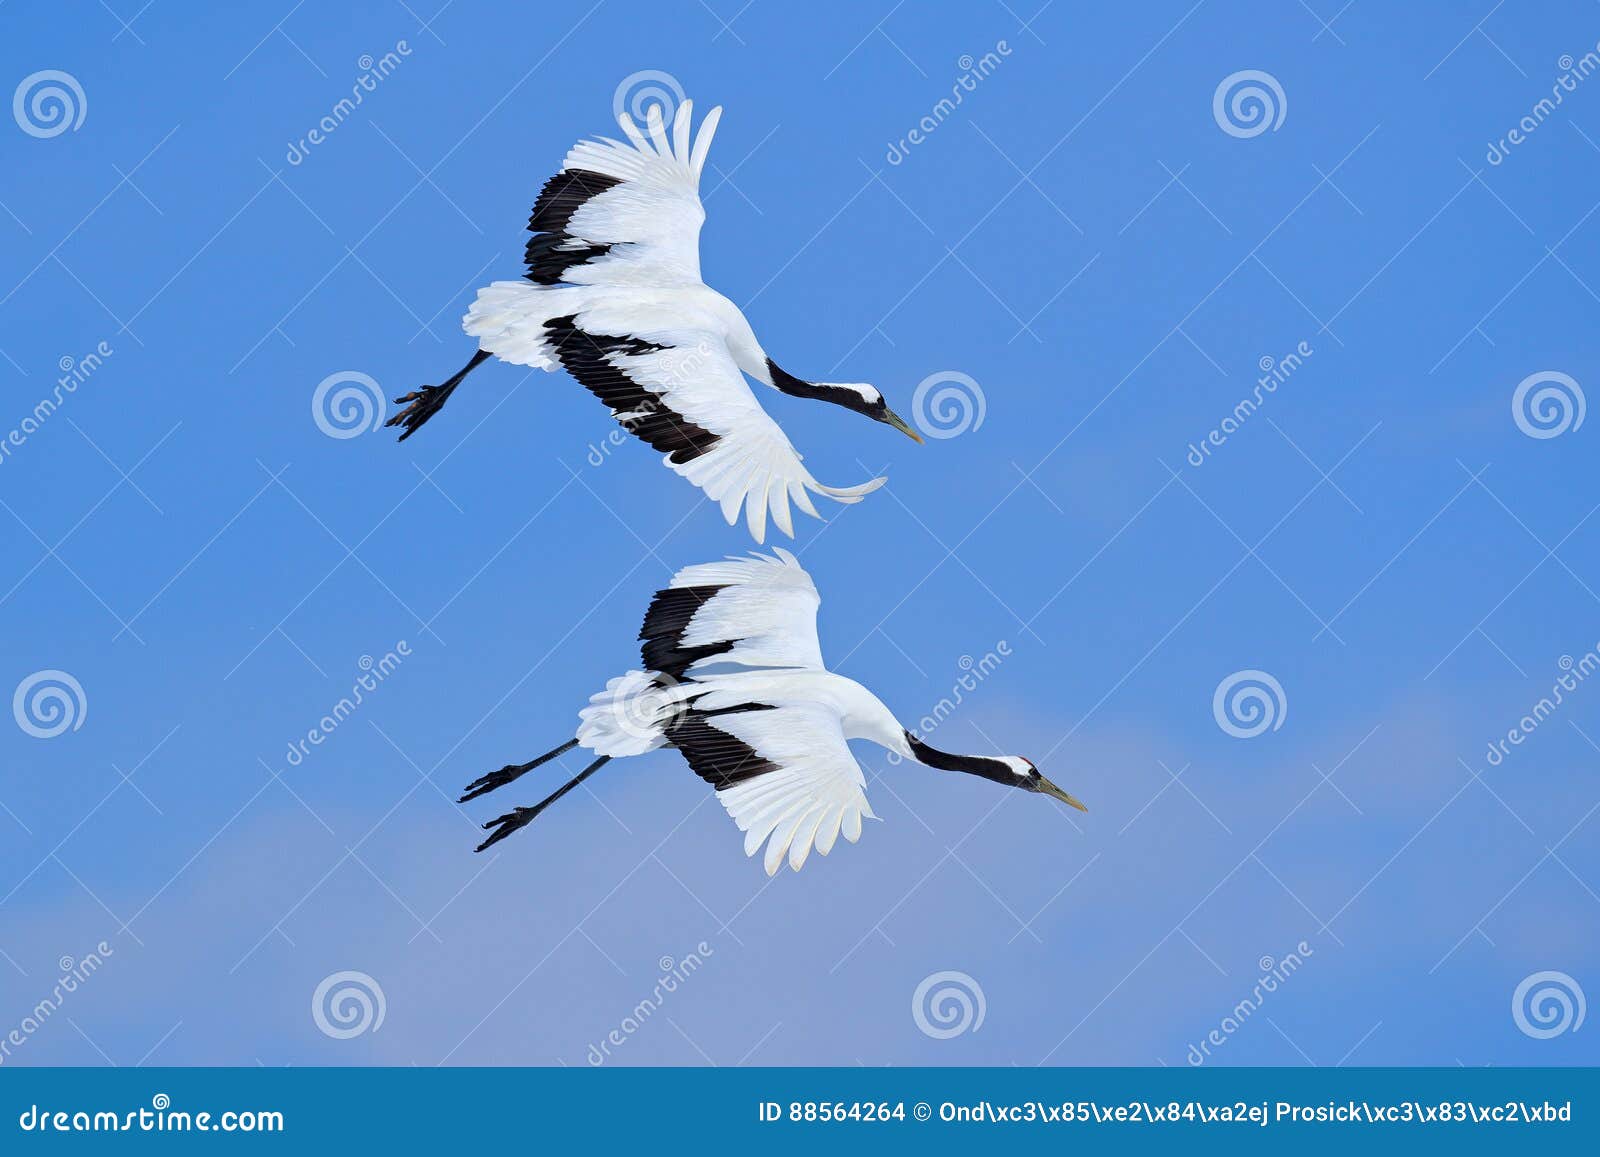 two birds on the sky. flying white two birds red-crowned crane, grus japonensis, with open wing, blue sky with white clouds in bac